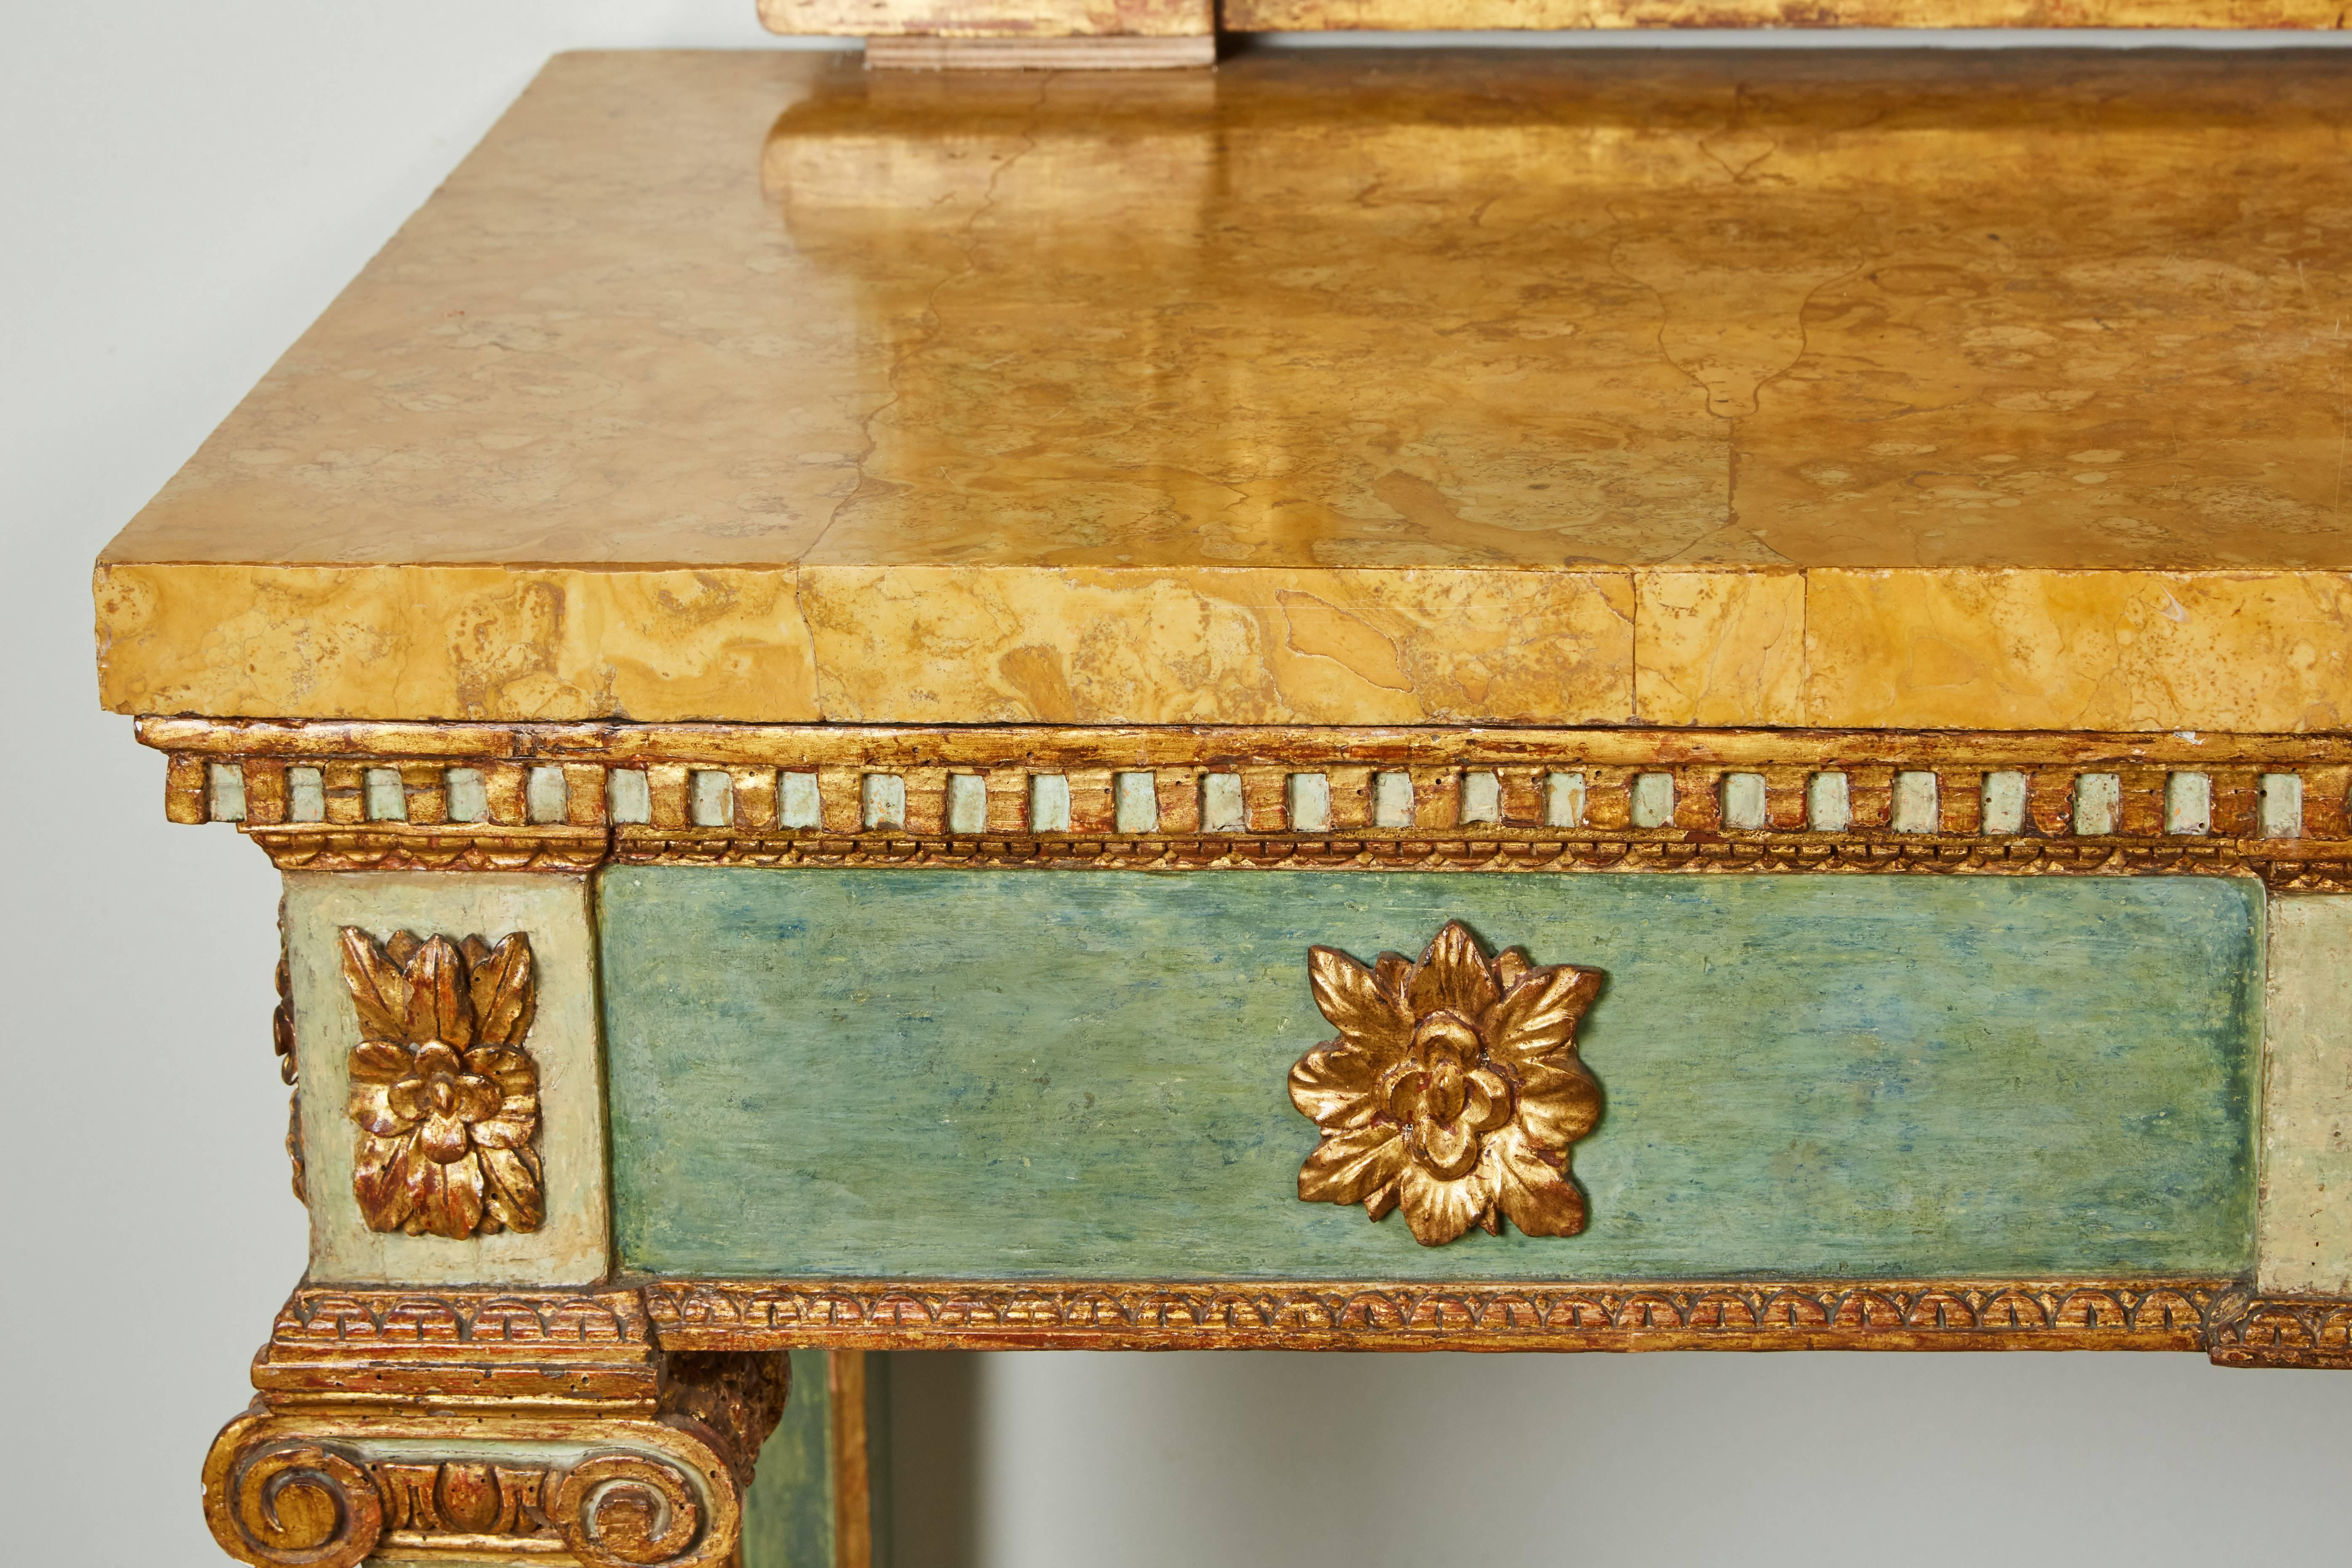 A striking late 18th century Italian parcel-gilt and blue-green painted mirror over console. 

The console table over square fluted legs 
capped between iconic capitals under a Giallo veneered marble top.
The mirror, exhibiting gilt foliate